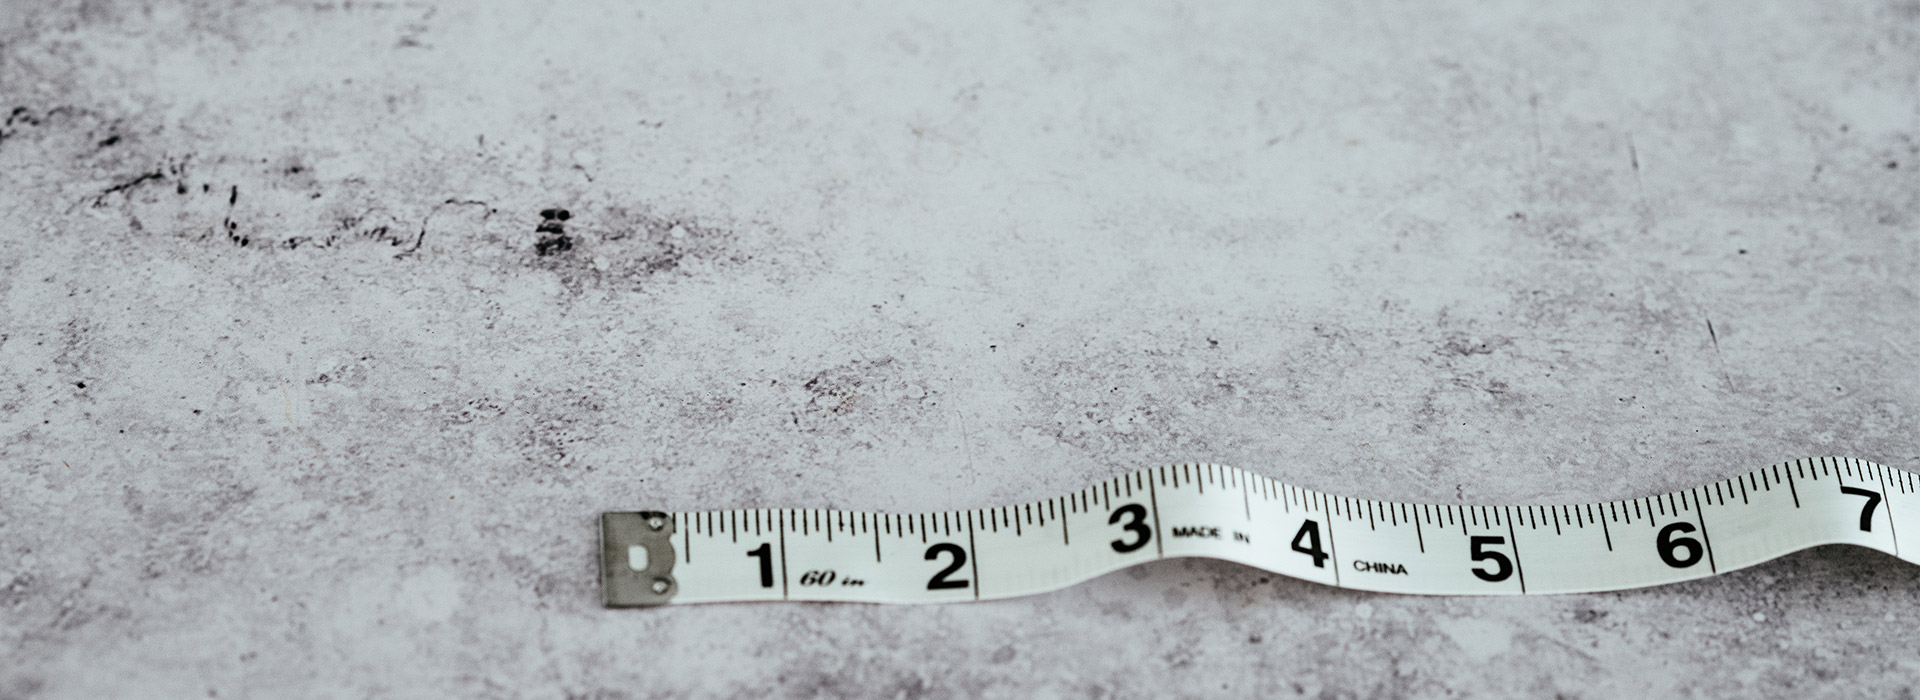 White loose measuring tape stretched out to 7 inches on marbled surface